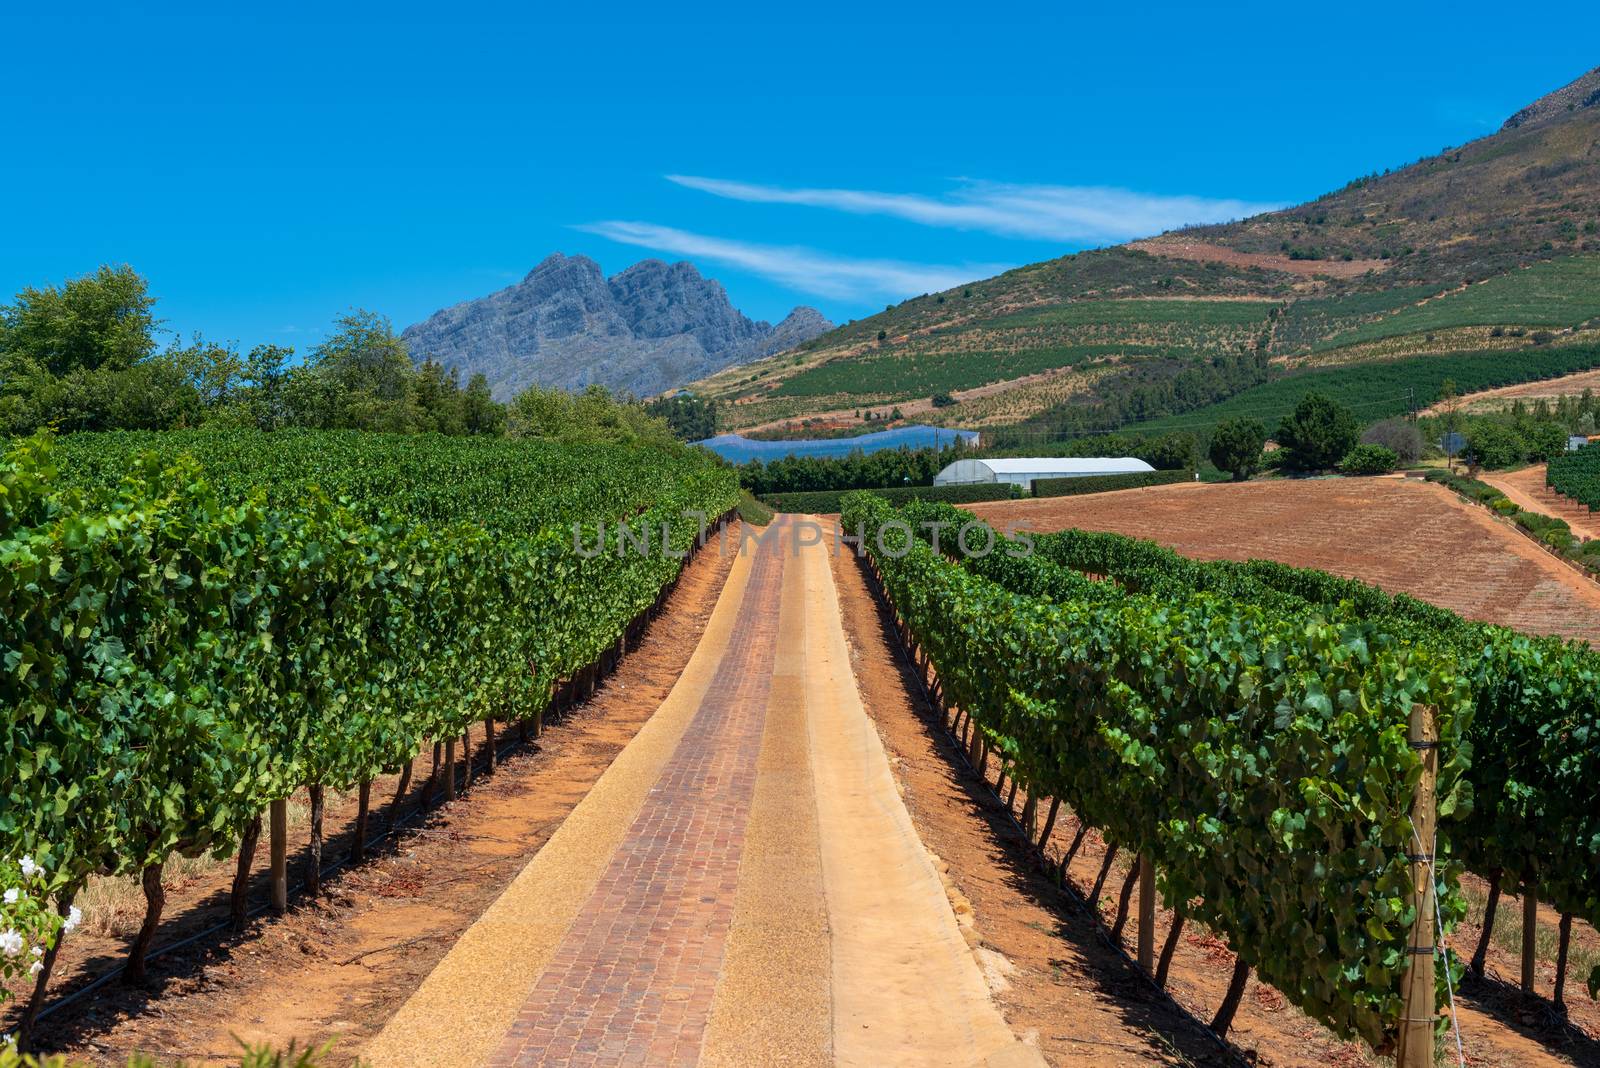 Landscape photo of a South African Vineyard with mountians in the background.